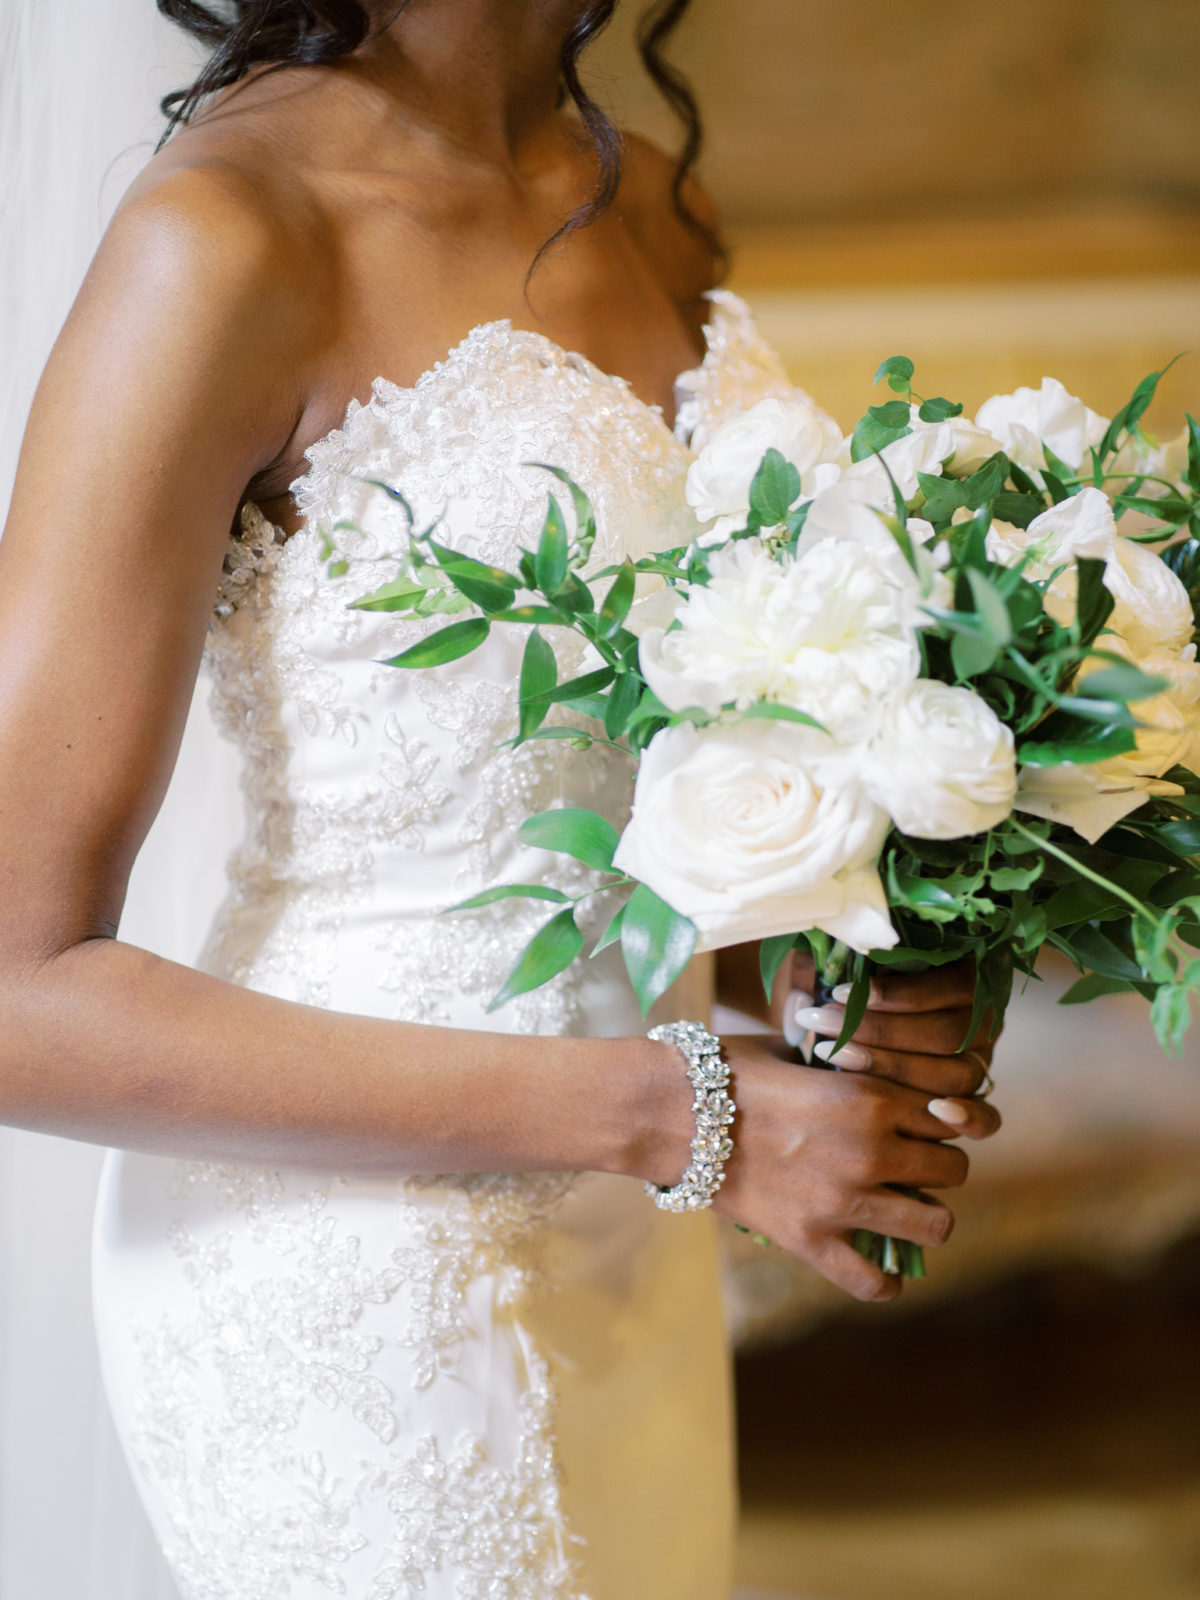 White roses wedding bouquet with greenery by Floral & Bloom.